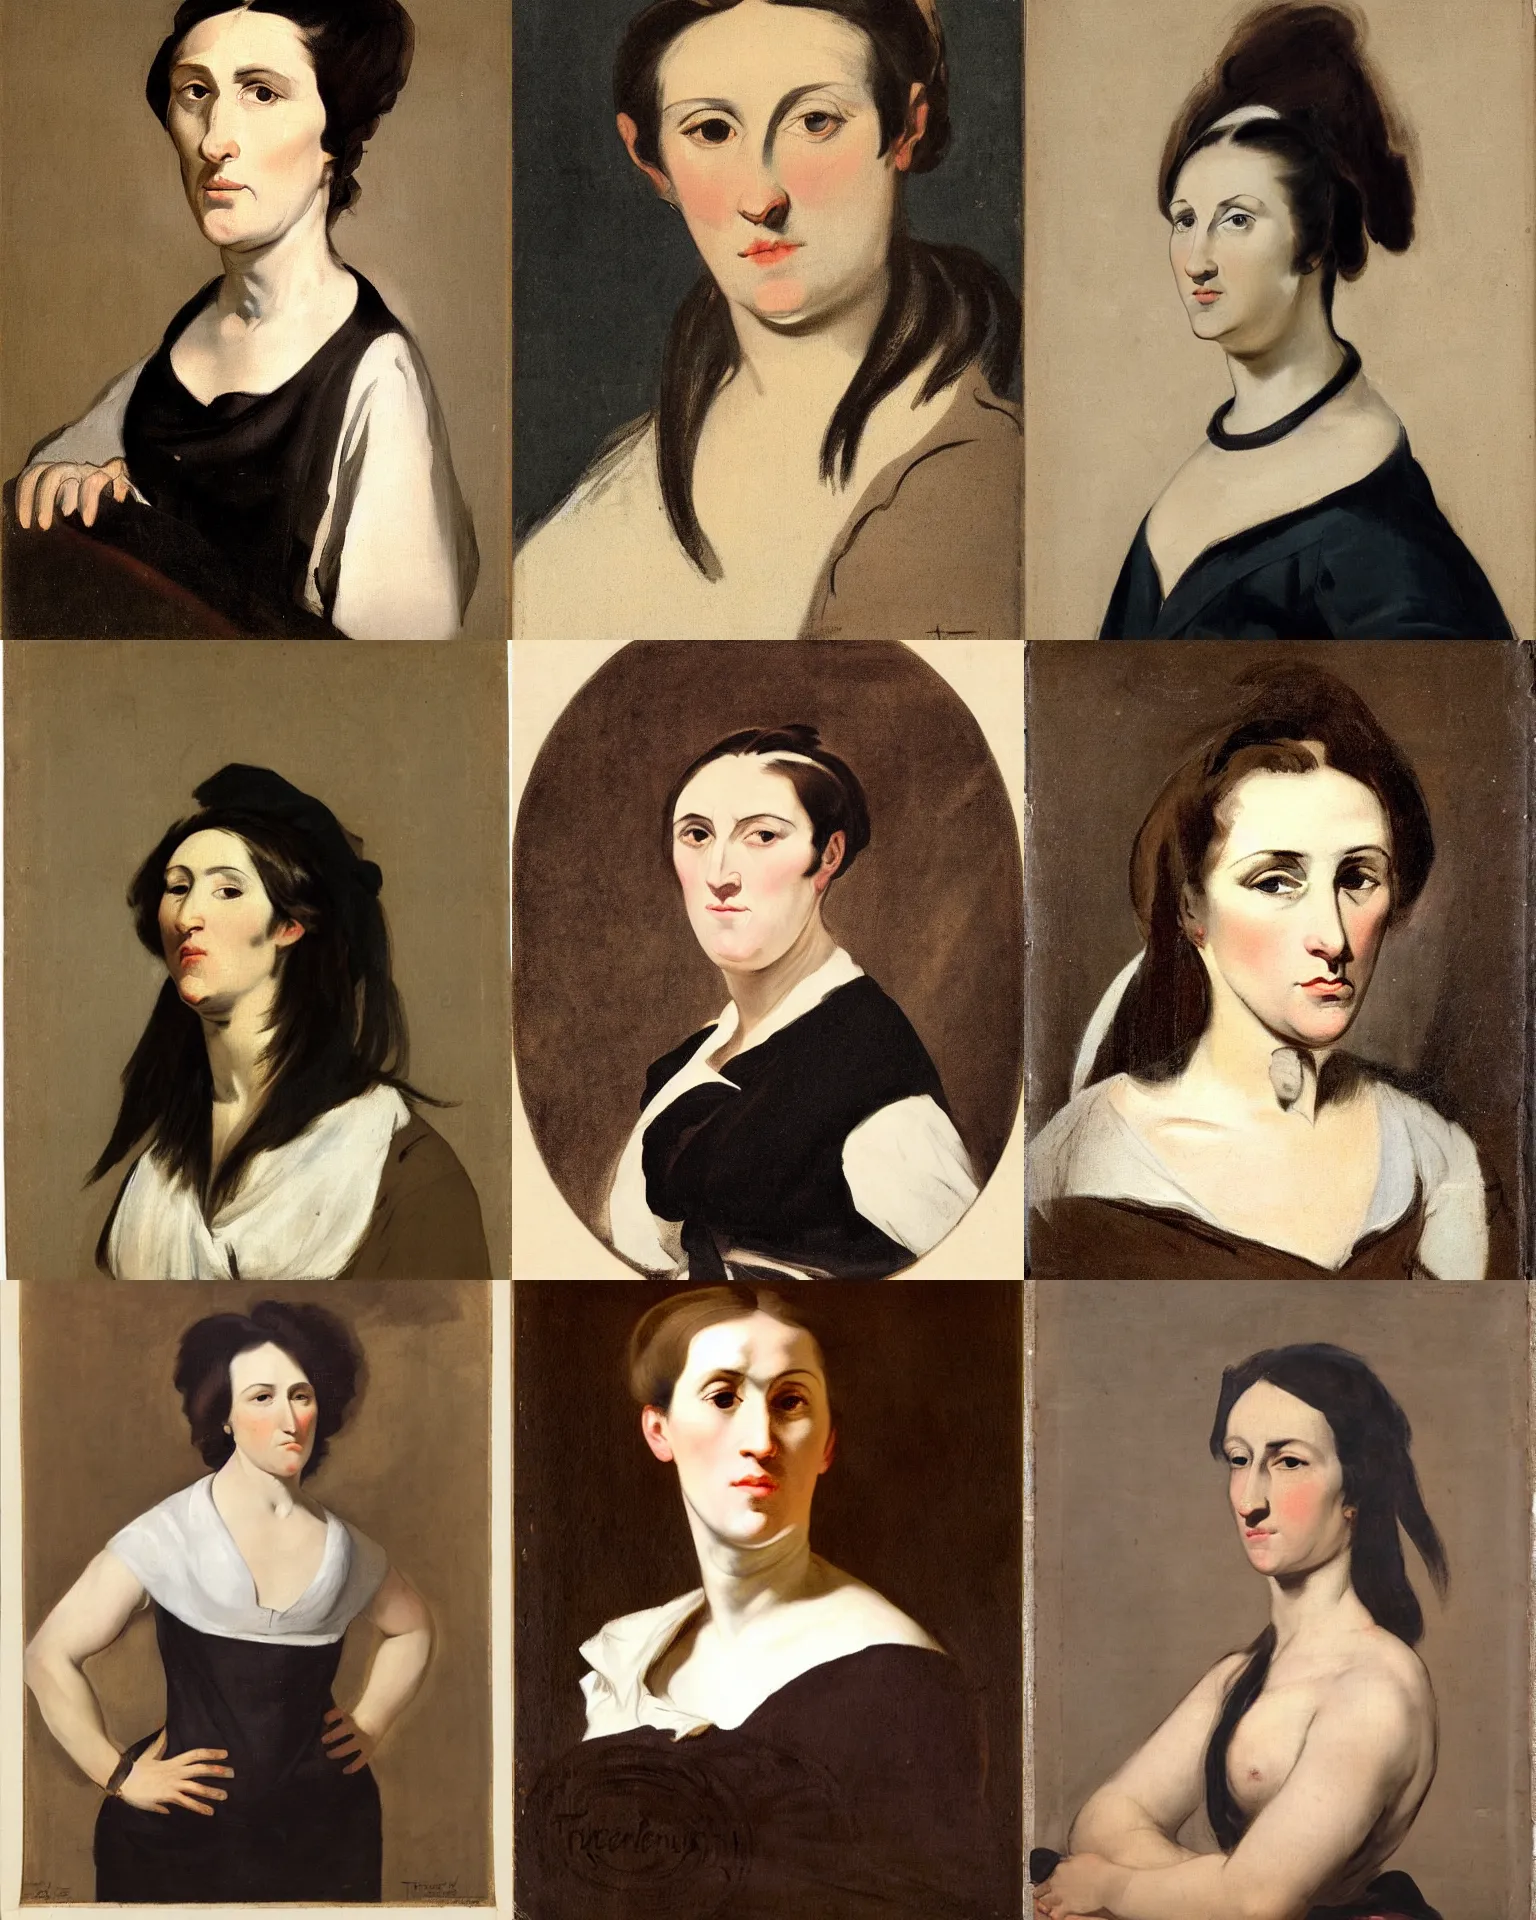 Prompt: a portrait of a woman by theodore gericault. she has long straight dark brown hair, parted in the middle. she has large dark brown eyes, a small refined nose, and thin lips. she is wearing a t - shirt with the supreme brand logo lettering on it, a sleeveless white blouse, a pair of dark brown capris, and black loafers.